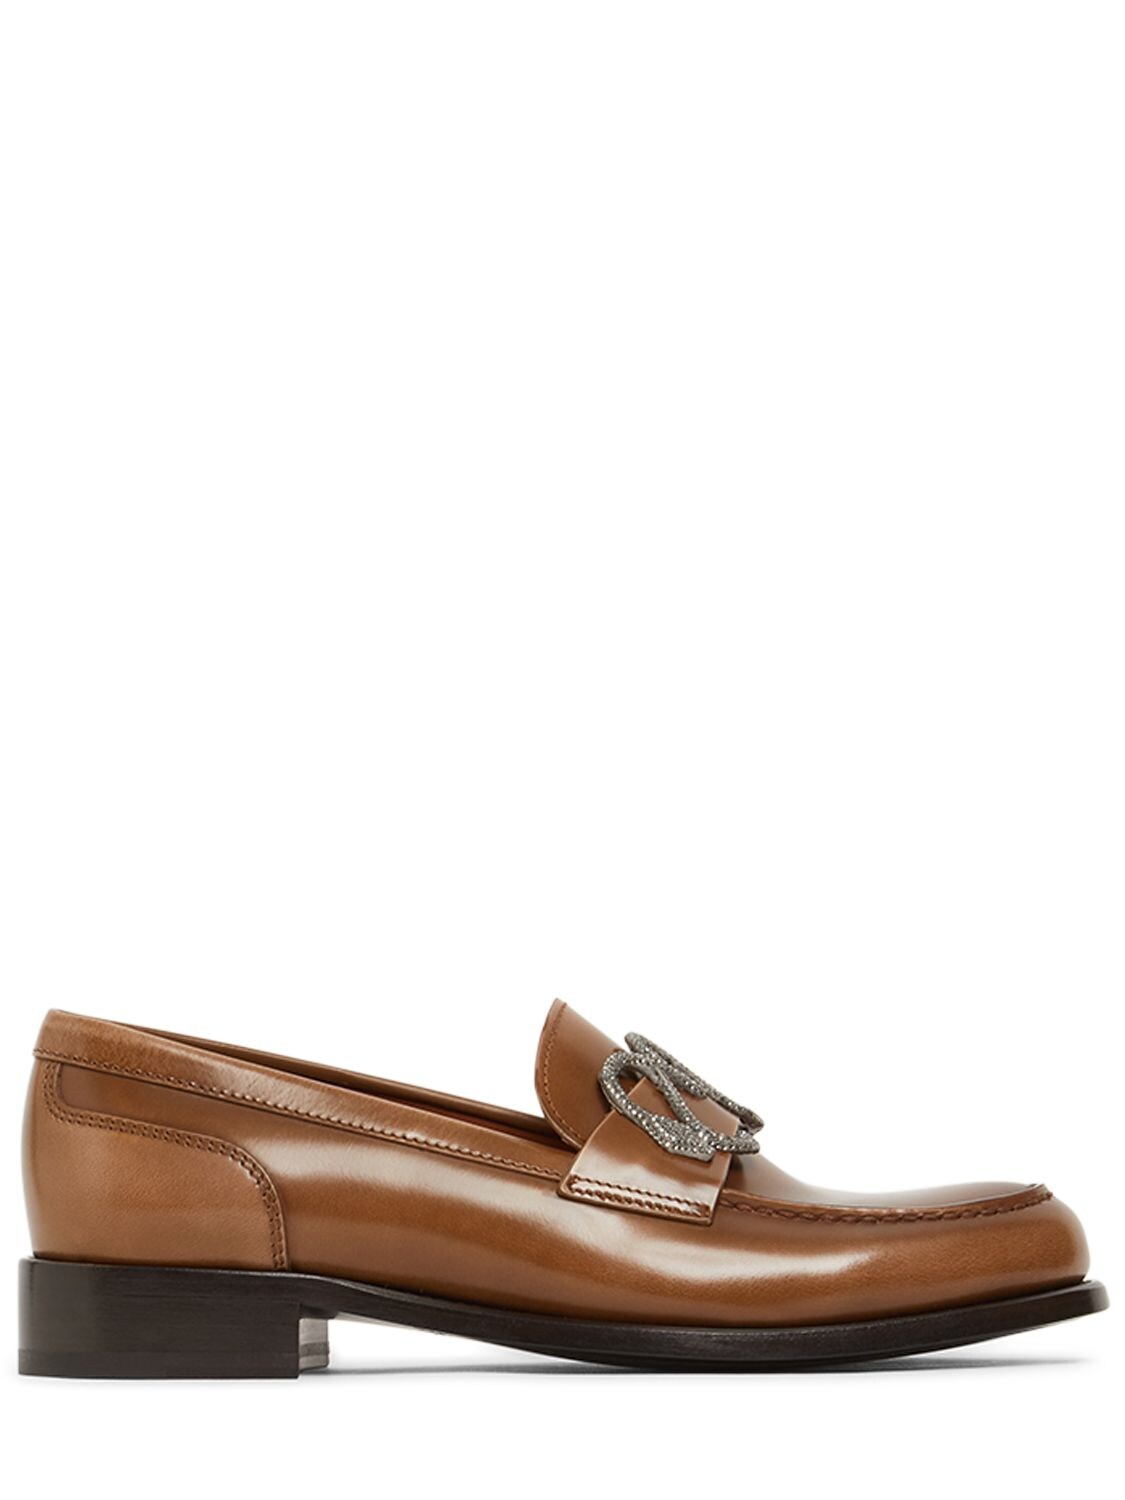 RENÉ CAOVILLA 25MM BRUSHED LEATHER LOAFERS